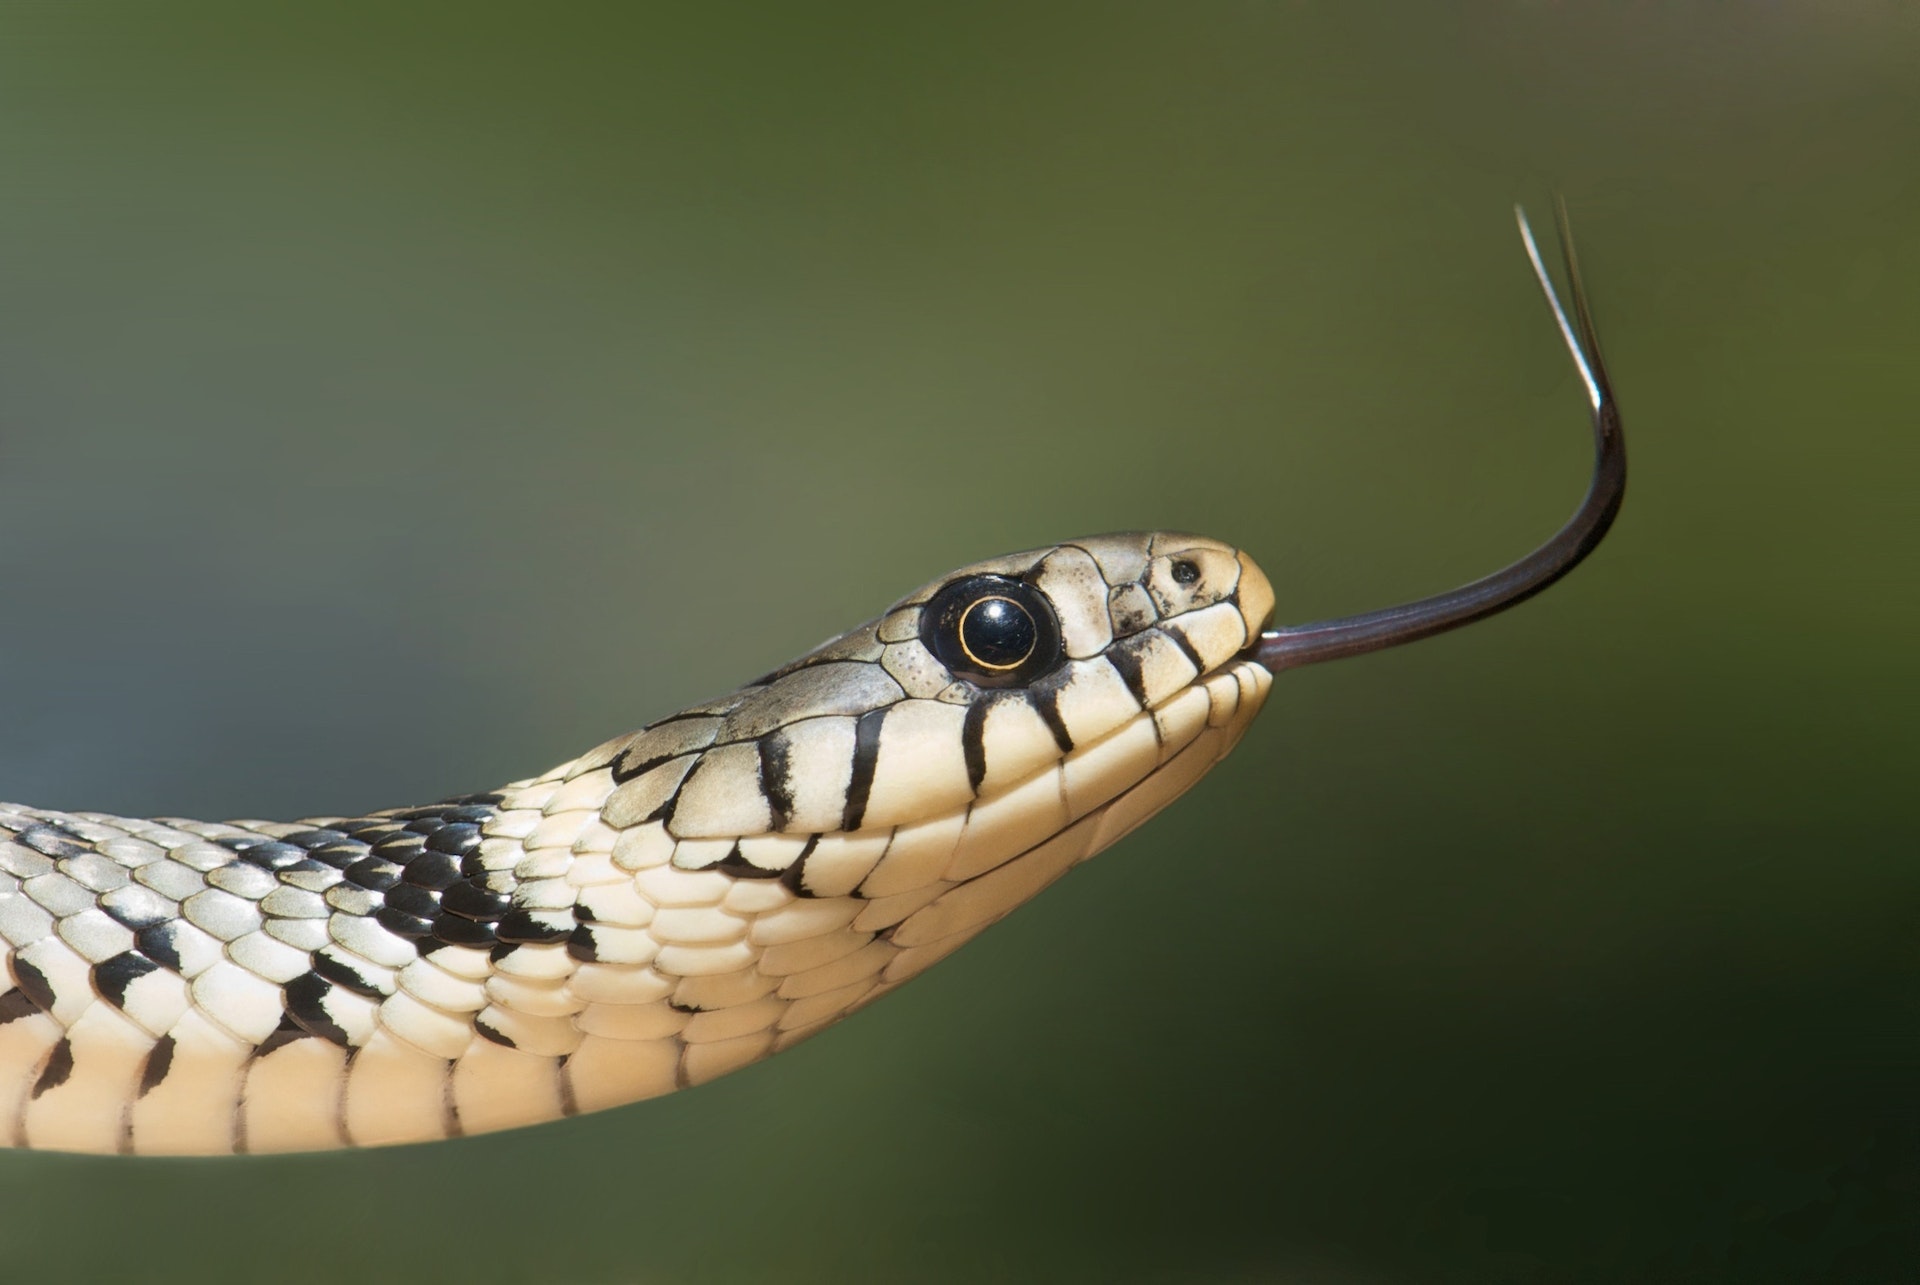 Snake Fasting: How Long Can a Snake Go Without Eating?